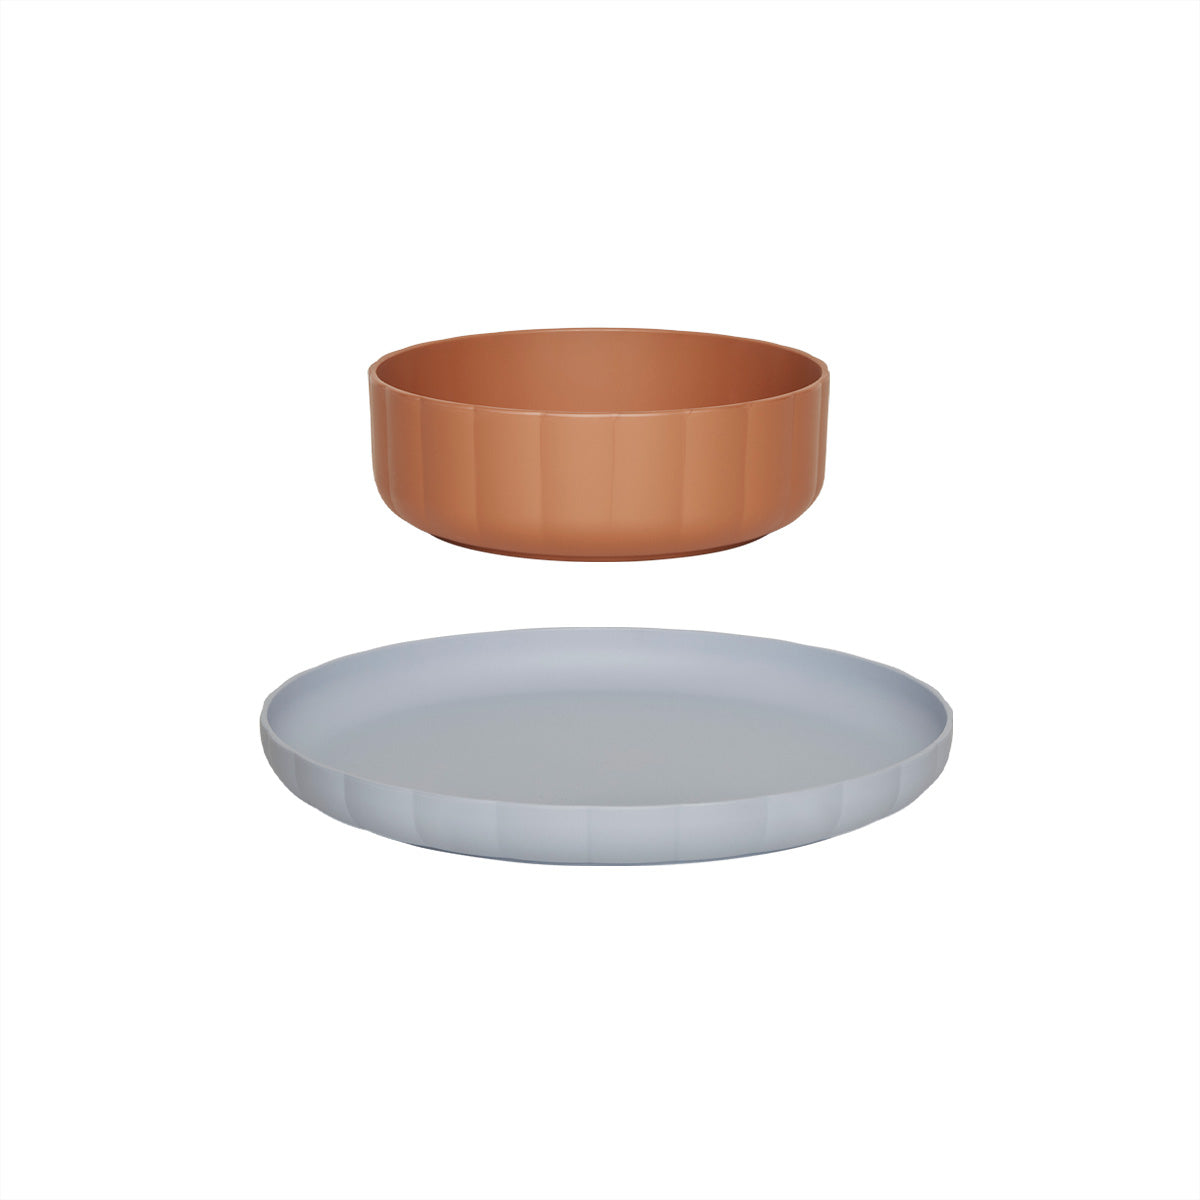 OYOY MINI Pullo Plate & Bowl - Set of 2 Dining Ware